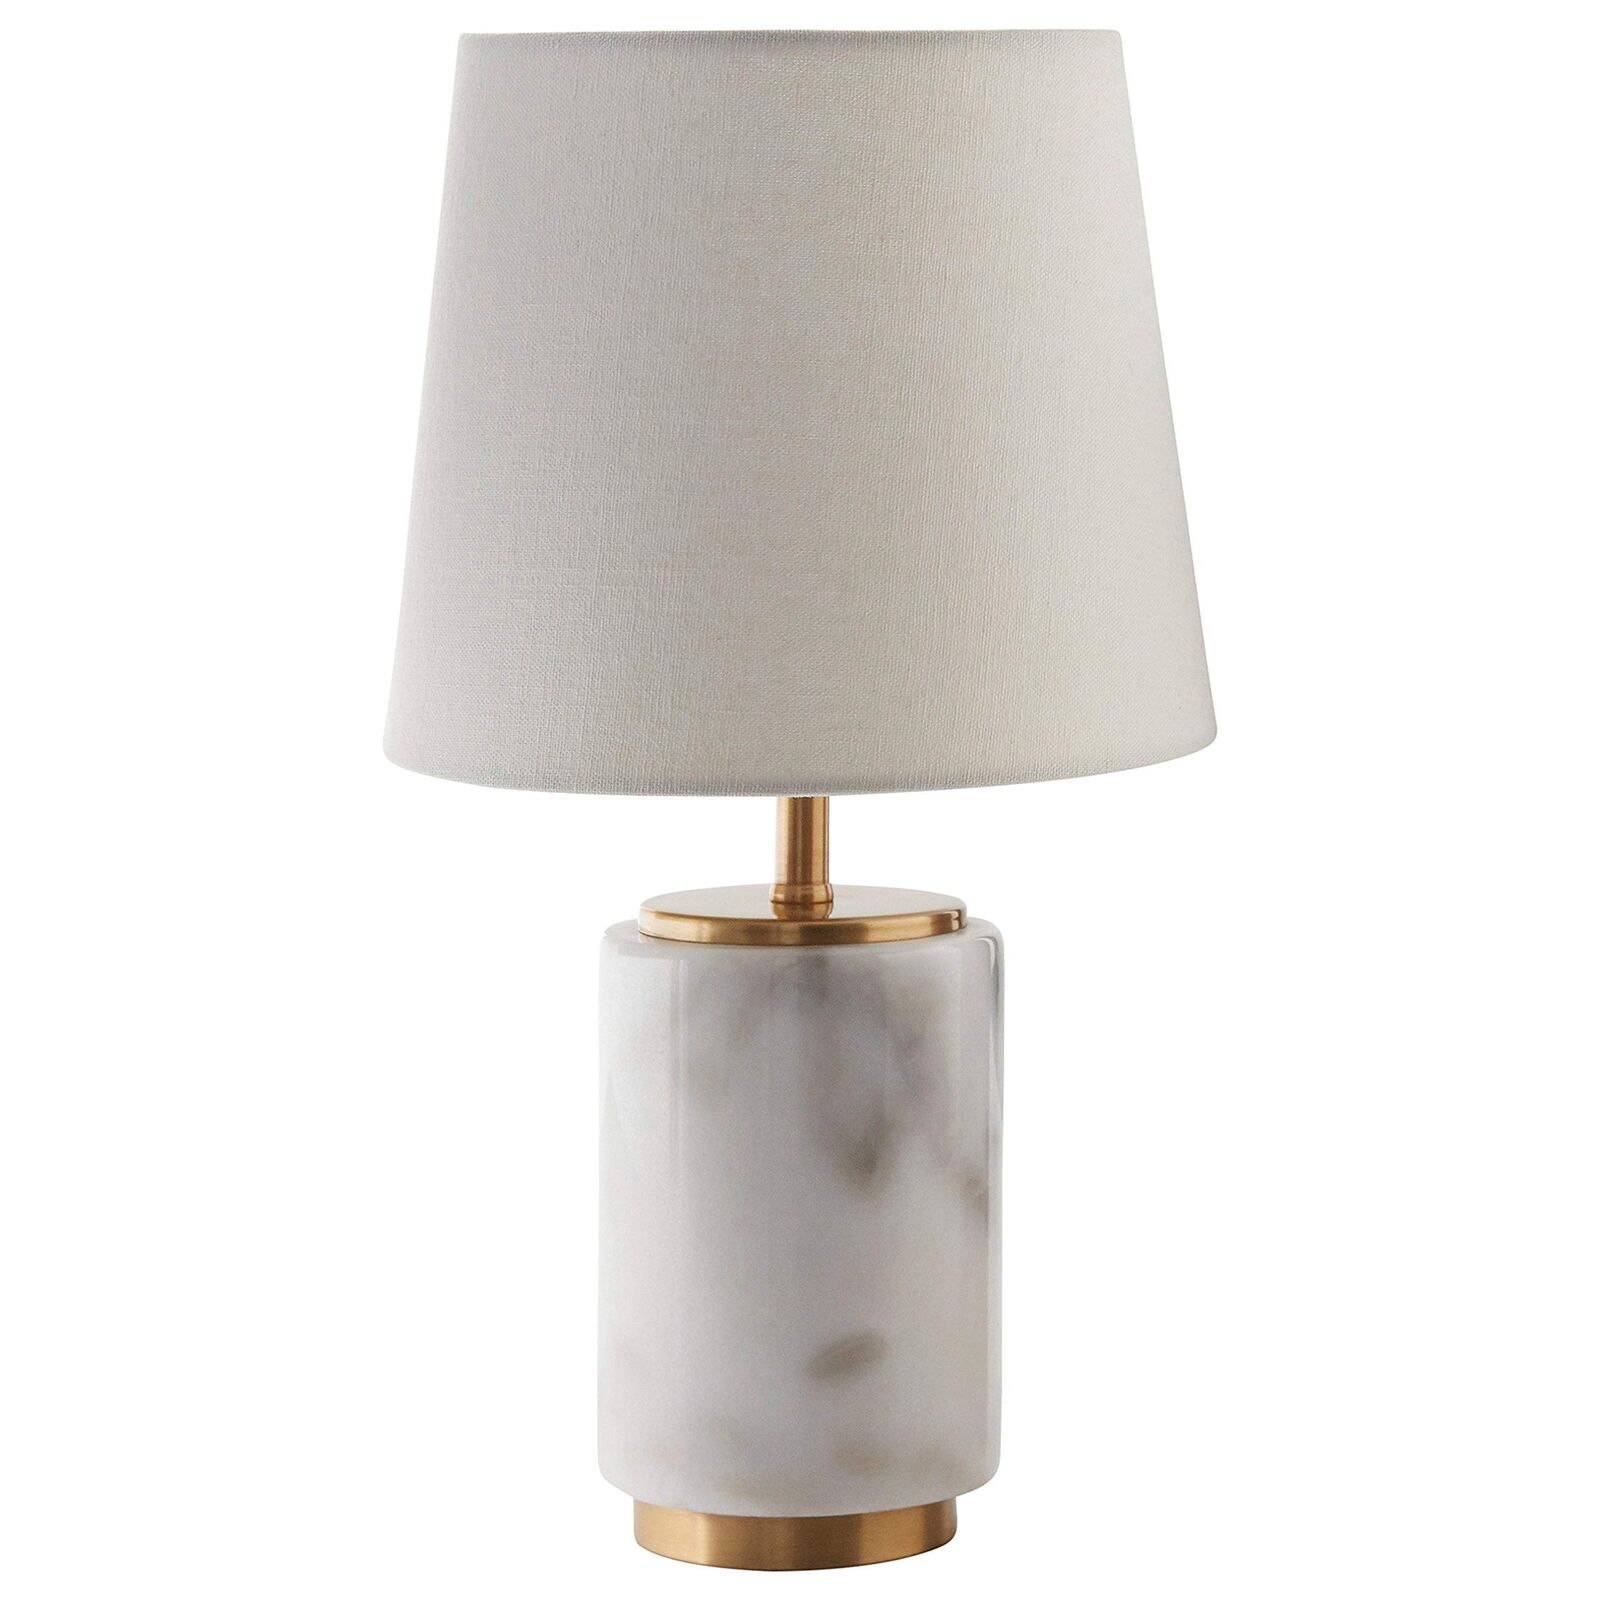 Amazon Brand - Rivet Mid Century Modern Marble and Brass Table Decor Lamp Wit...